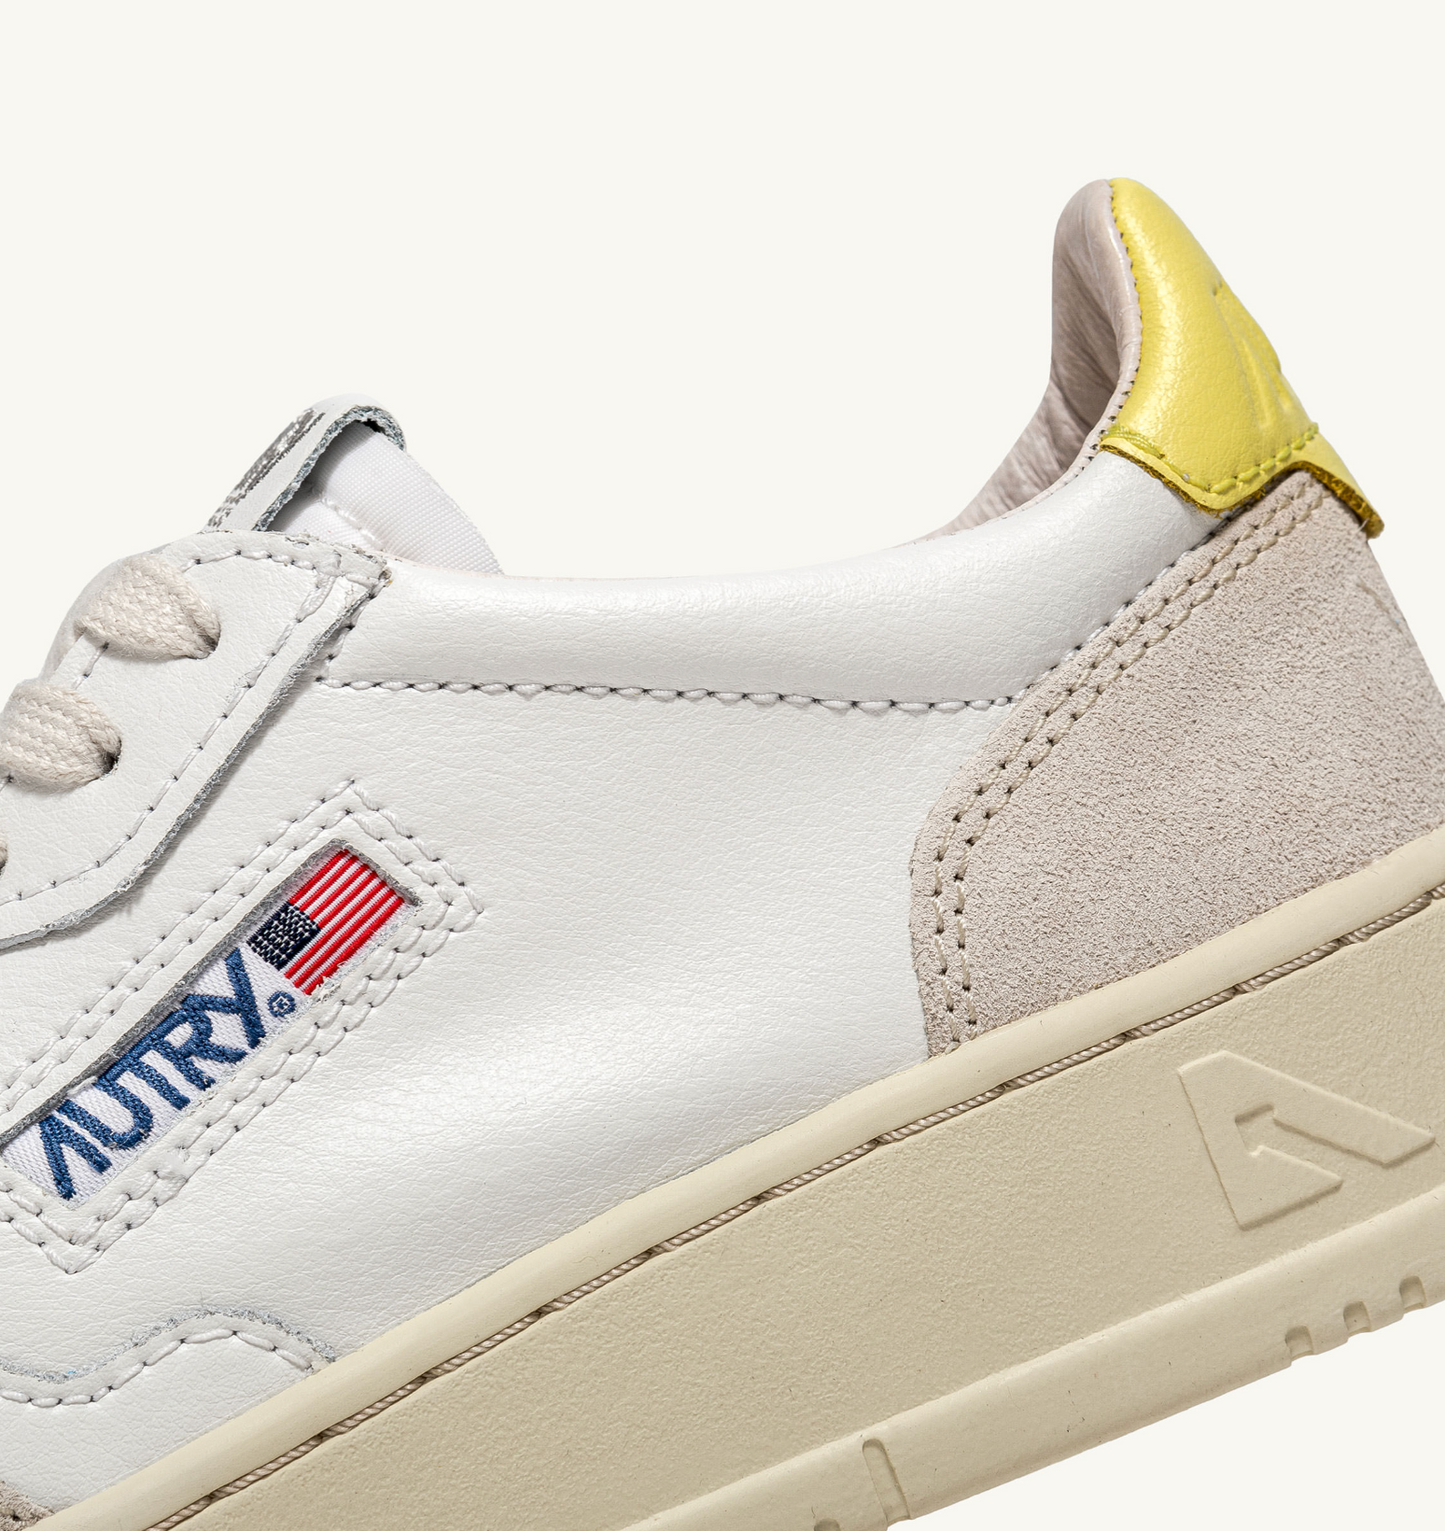 MEDALIST LOW SUEDE/LEATHER WHITE/YELLOW